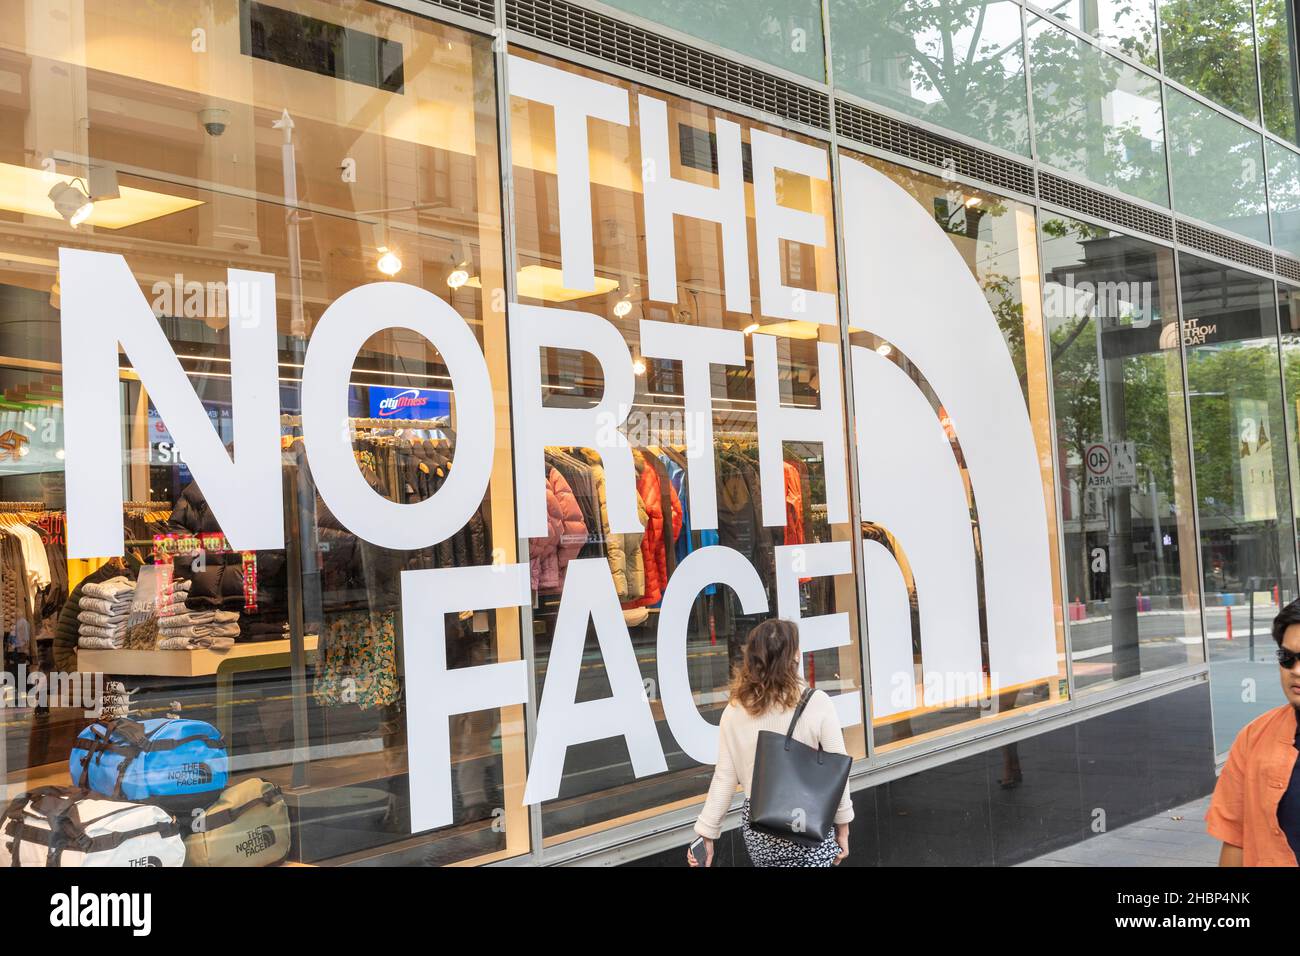 The north face clothing shop hi-res stock photography and images - Alamy